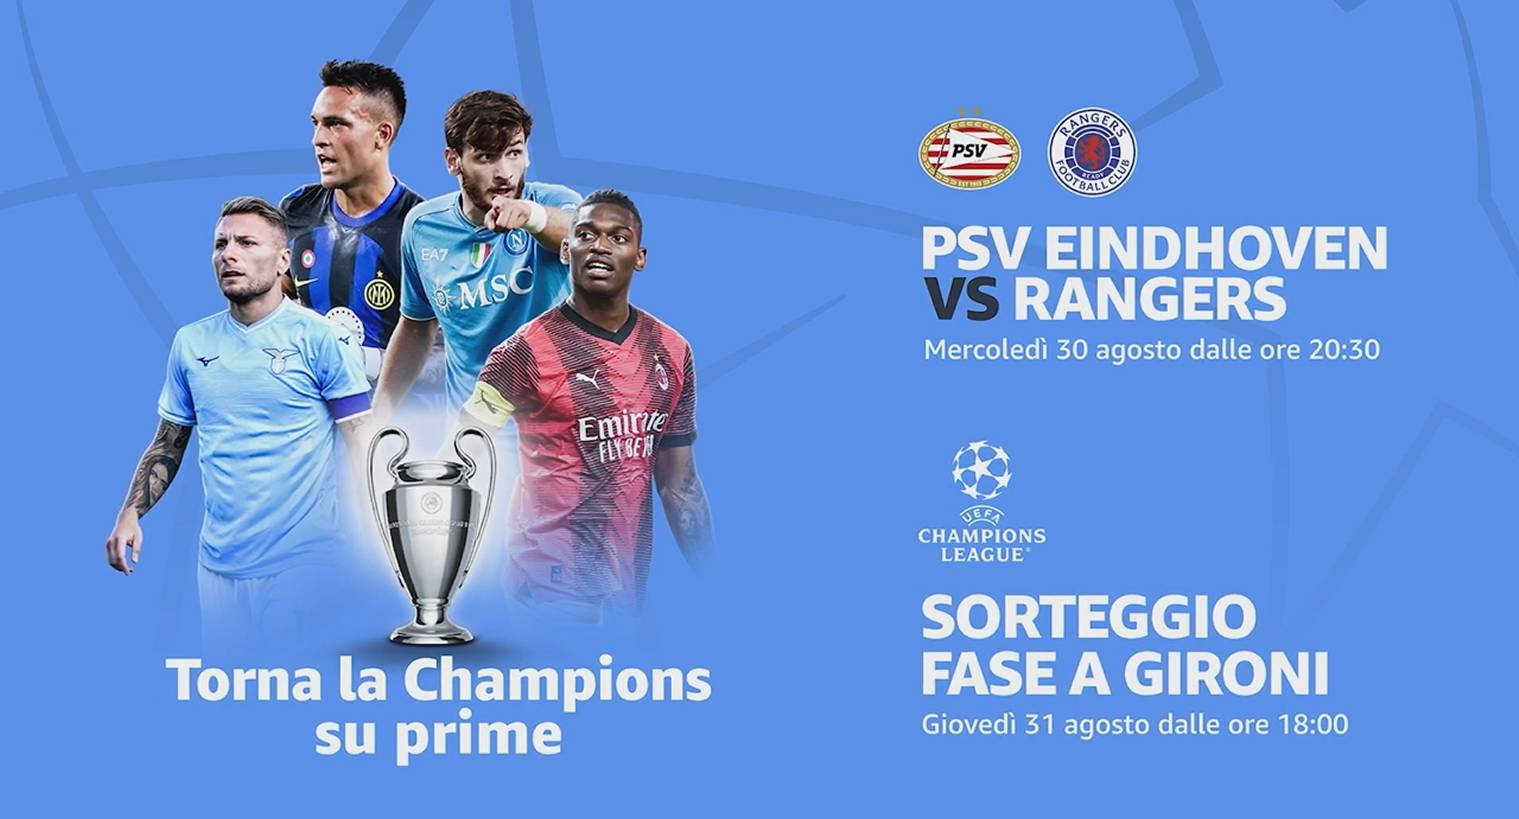 Foto - Champions League, stasera PSV Eindhoven - Glasgow Rangers in live streaming su Prime Video